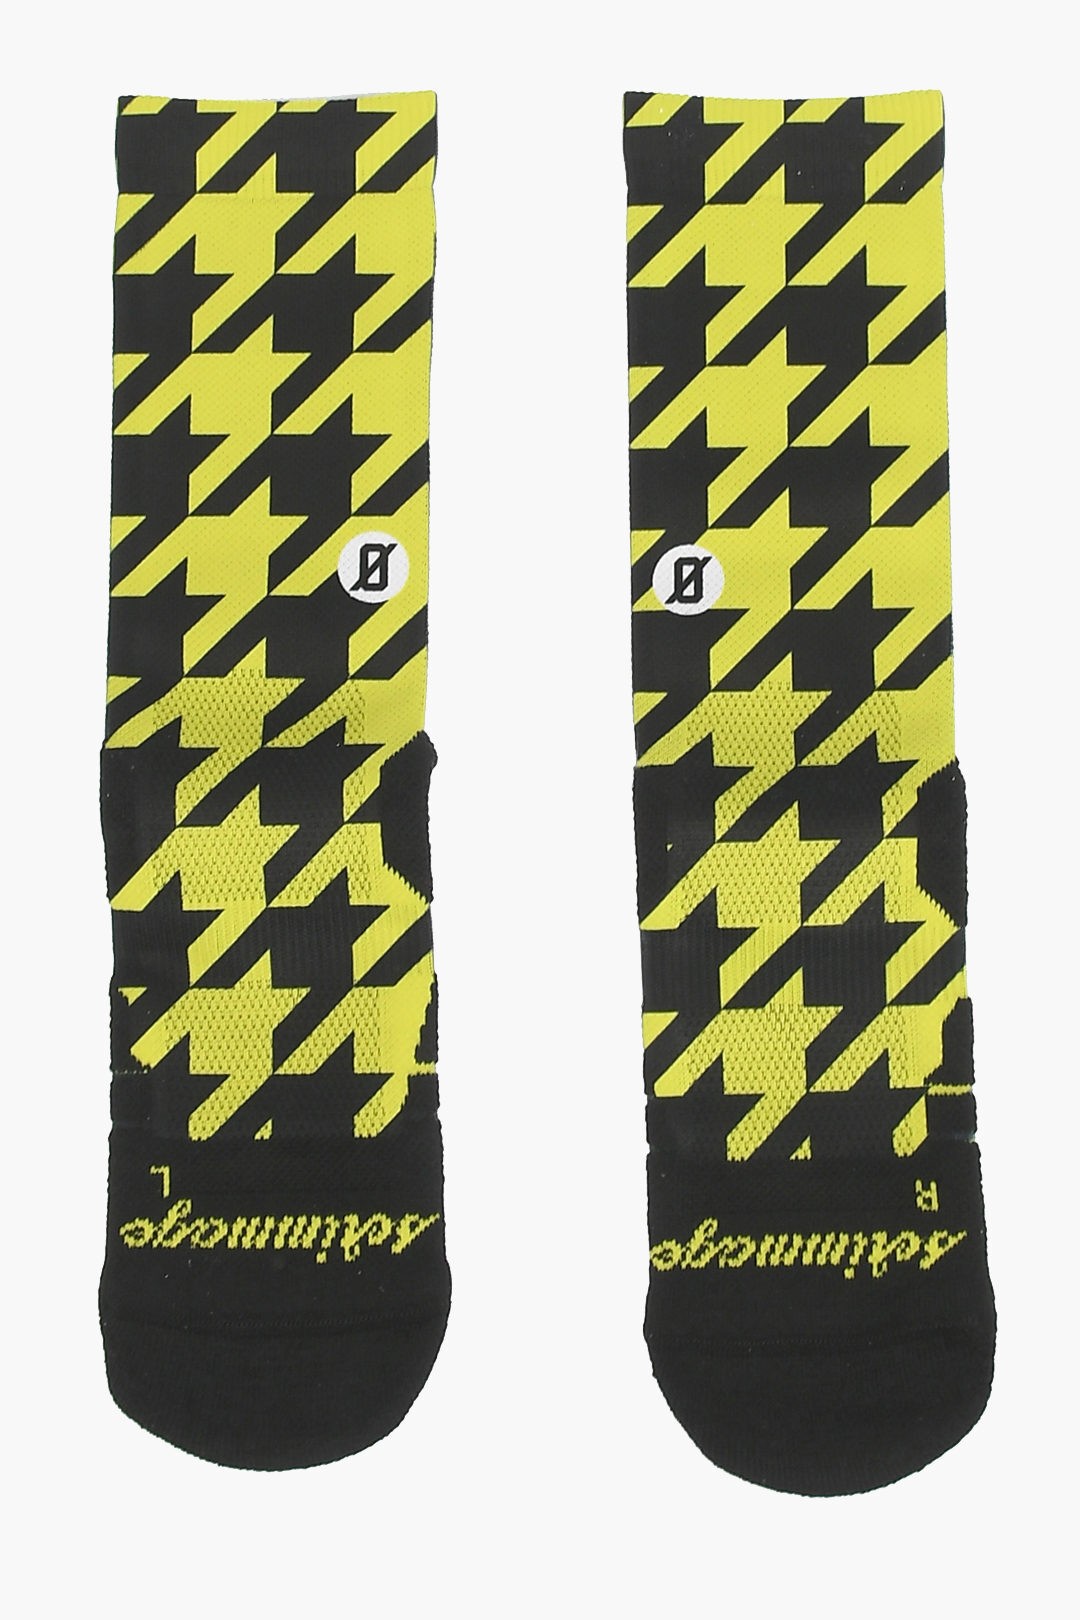 TOOT 【本日5の付く日ポイント4倍!】 SCRIMMAGE スクリメージ アンダーウェア PIED POULE YELLOW メンズ HOUNDSTOOTH PATTERNED TWO-TONE SOCKS 【関税・送料無料】【ラッピング無料】 dk